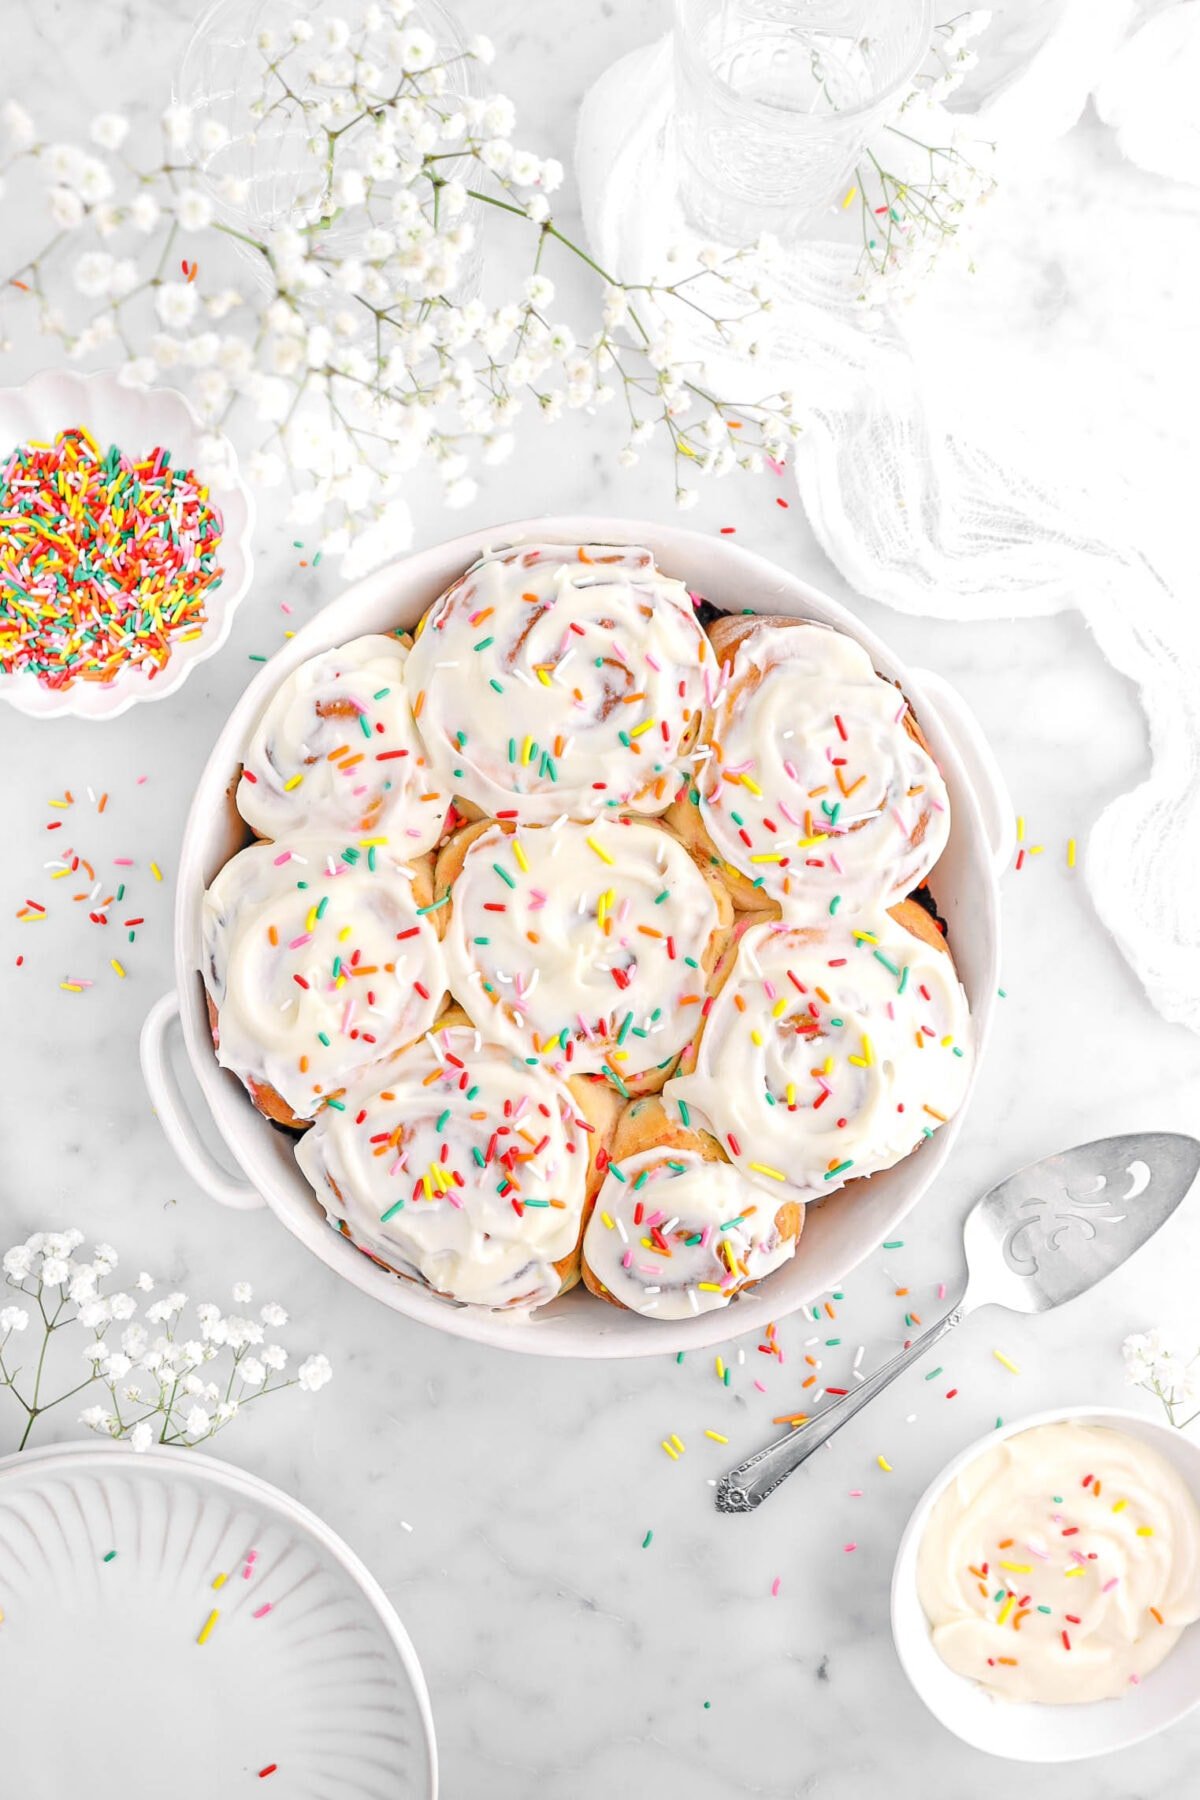 overhead shot of eight cinnamon rolls in white casserole with cream cheese frosting and rainbow sprinkles on top, with cake knife, bowl of frosting, bowl of sprinkles, and white flowers around.